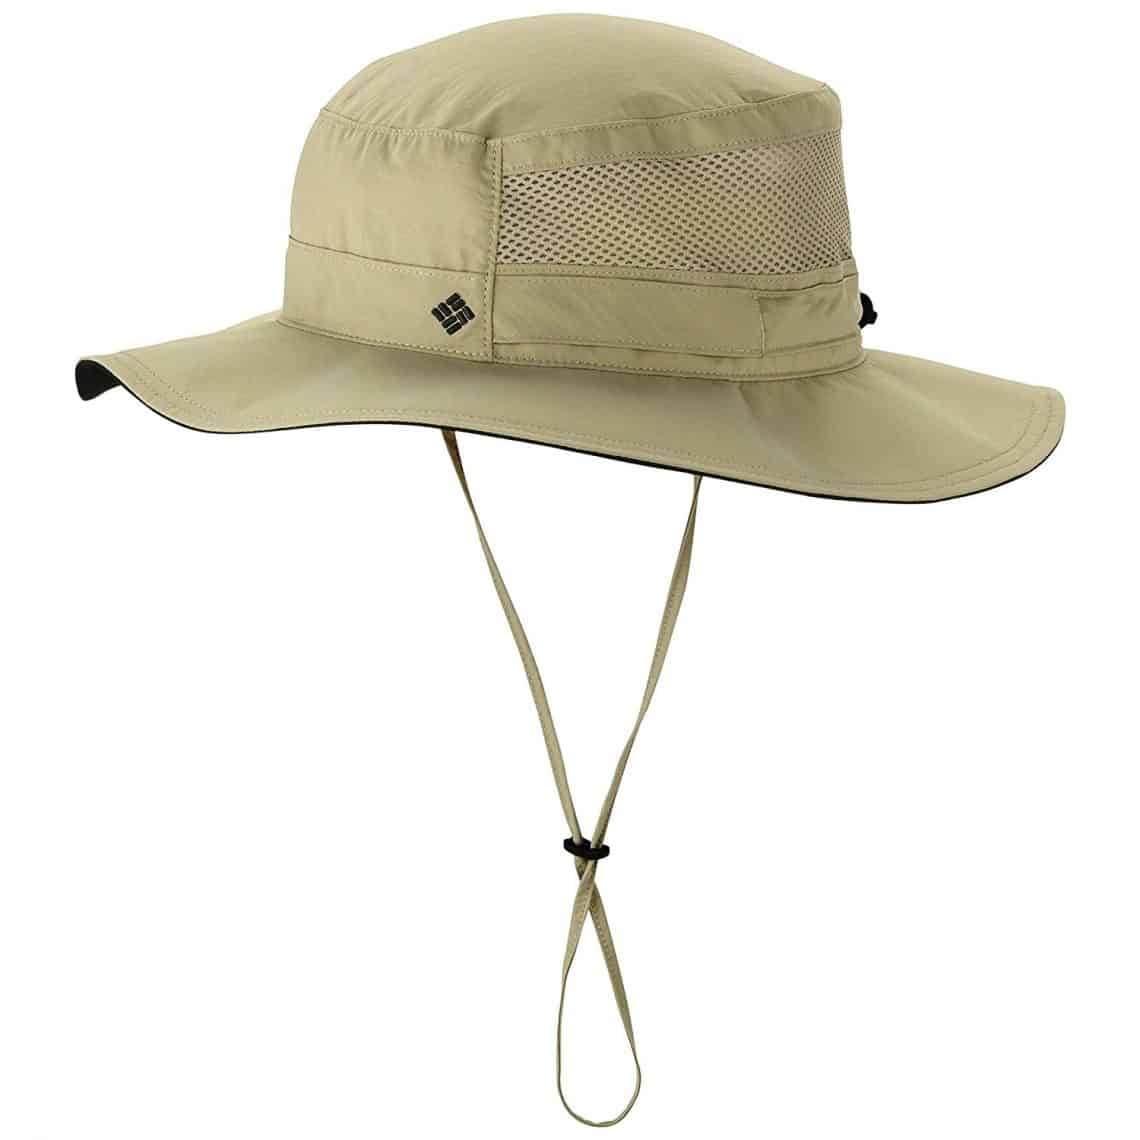 Best Hiking Hat: Top Product Picks and Buying Guide